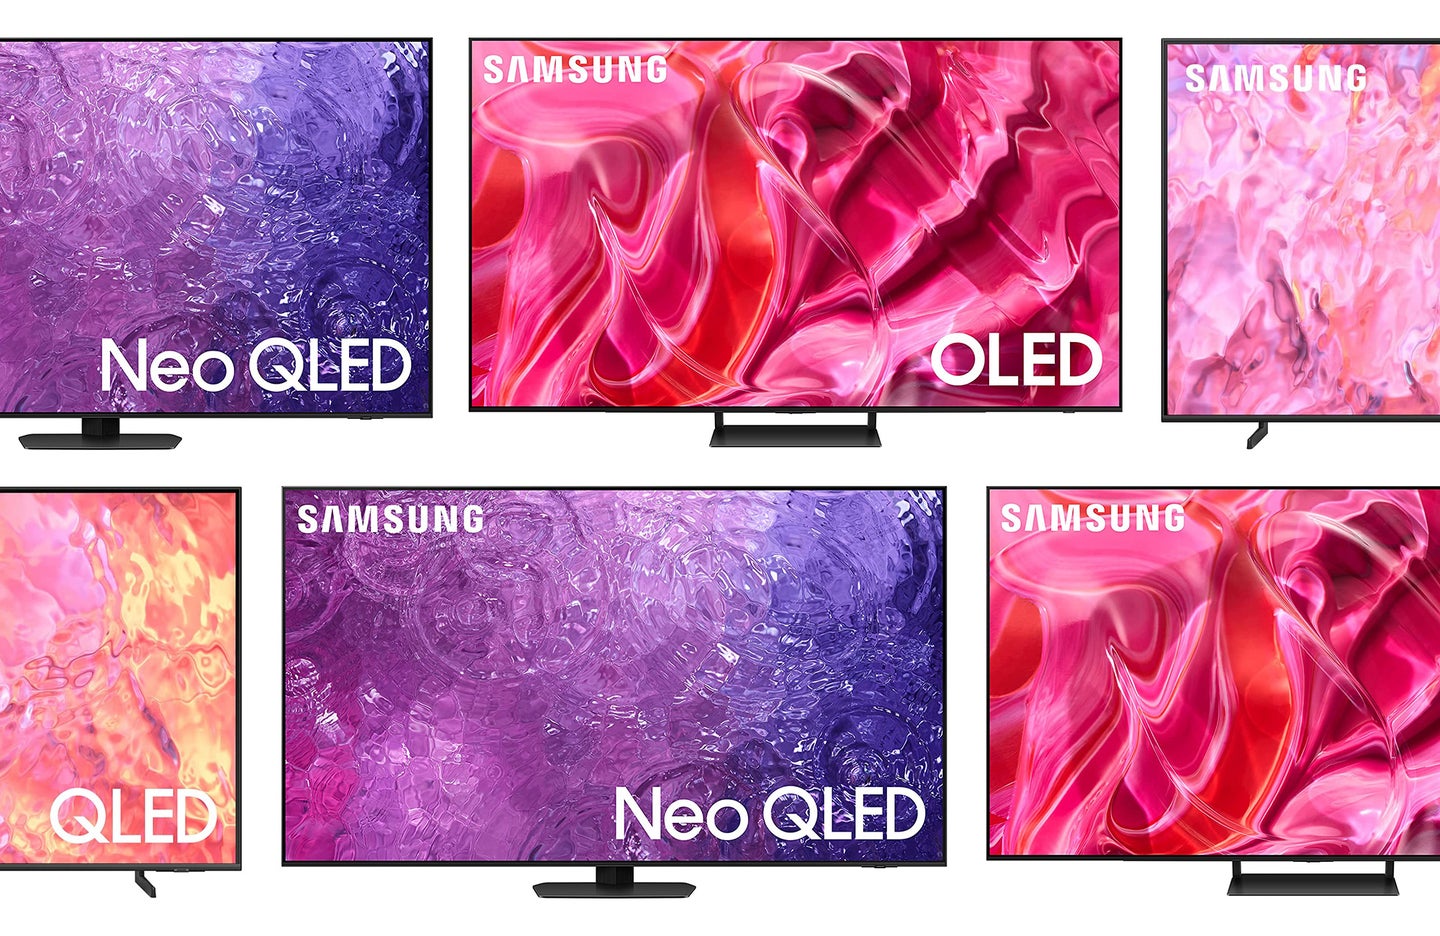 Samsung TVs arranged in a pattern. They're on-sale at Amazon.